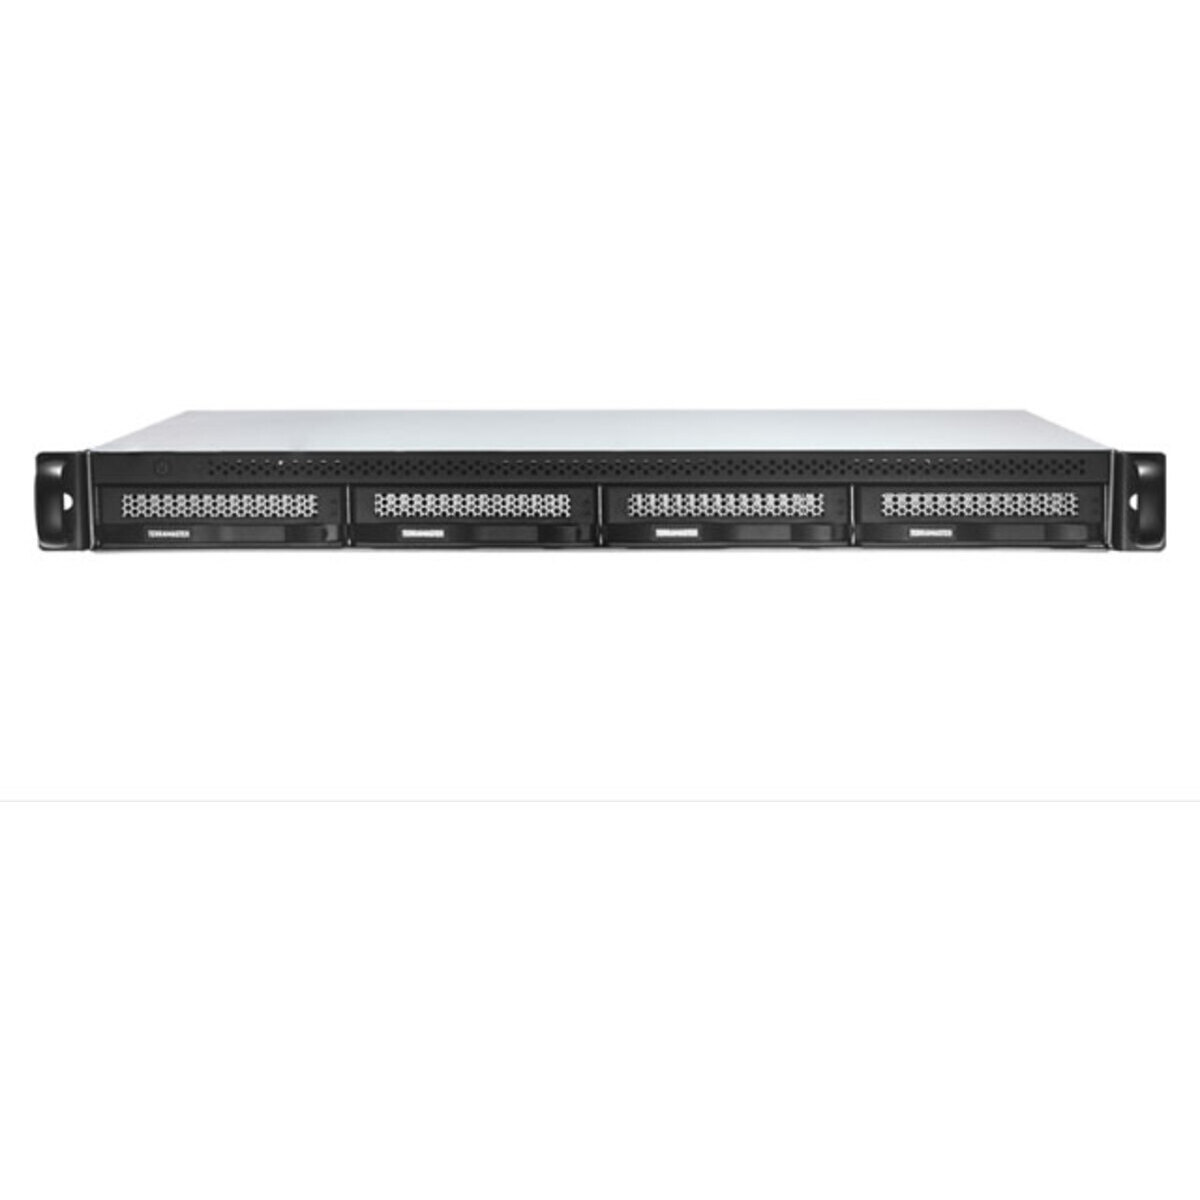 TerraMaster U4-423 12tb 4-Bay RackMount Multimedia / Power User / Business NAS - Network Attached Storage Device 3x4tb Sandisk Ultra 3D SDSSDH3-4T00 2.5 560/520MB/s SATA 6Gb/s SSD CONSUMER Class Drives Installed - Burn-In Tested - FREE RAM UPGRADE U4-423